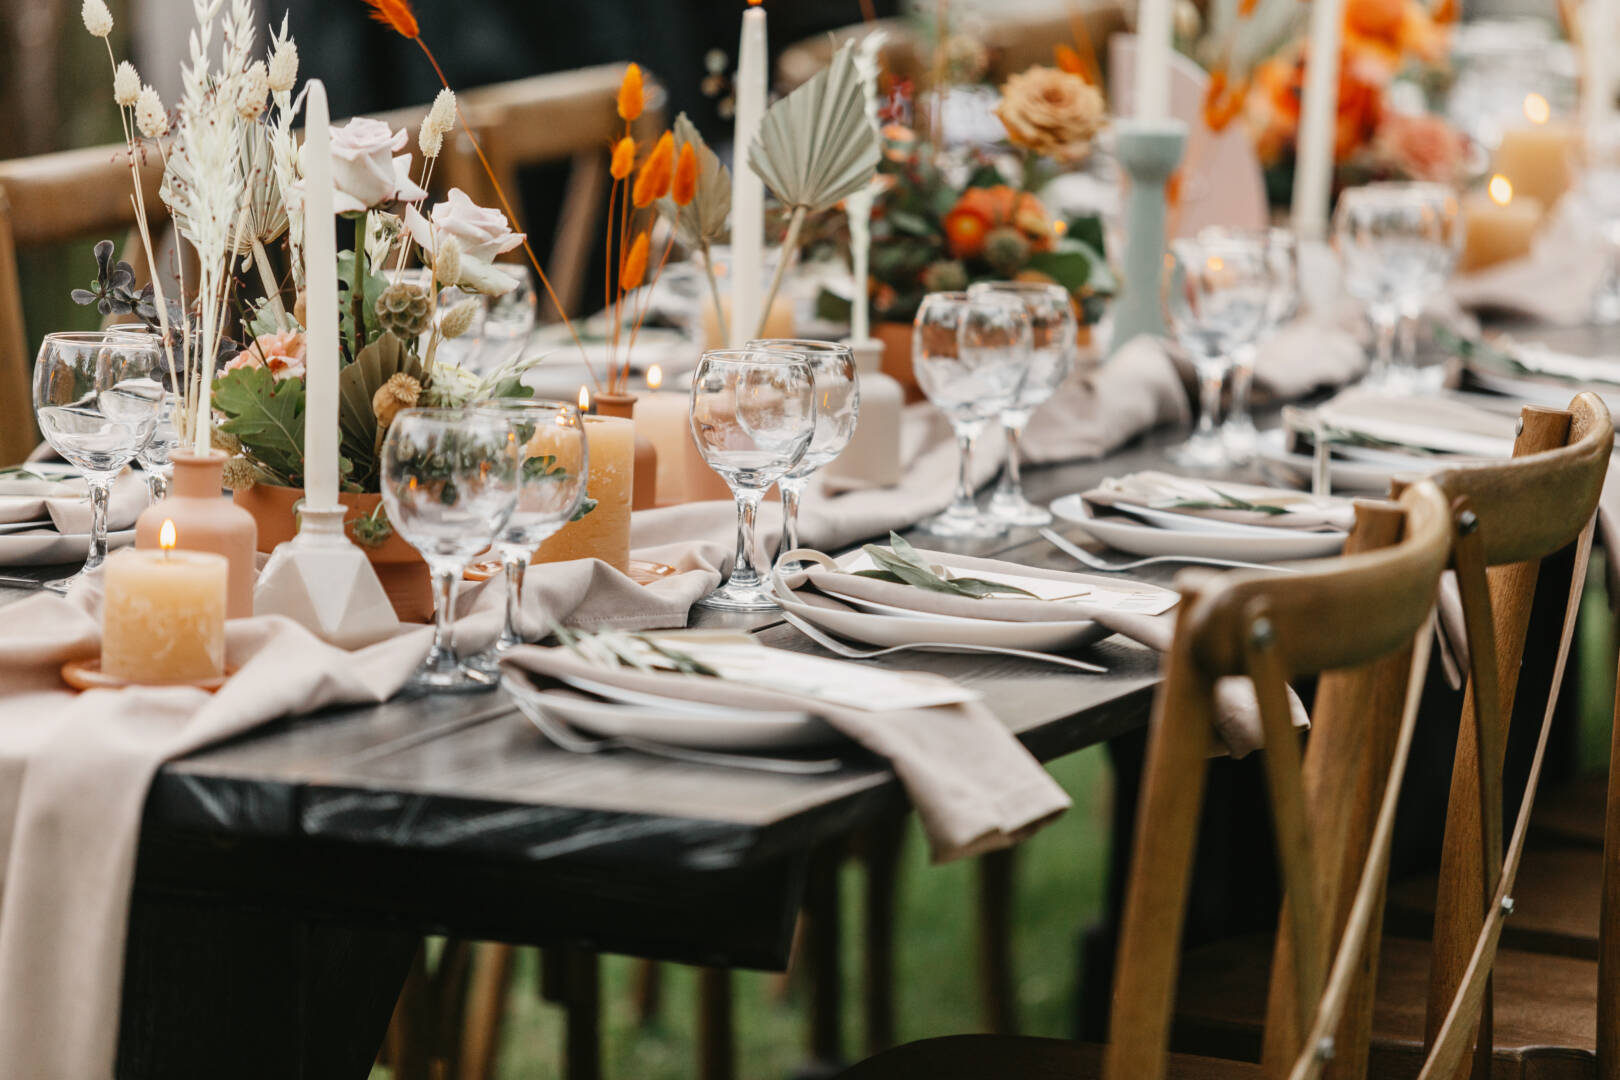 Event and catering agency organization modern wedding in boho style. Table for guests assembled with dishes, cutlery, glasses and flowers, candles and elements, chairs on green lawn, flat lay, outdoor